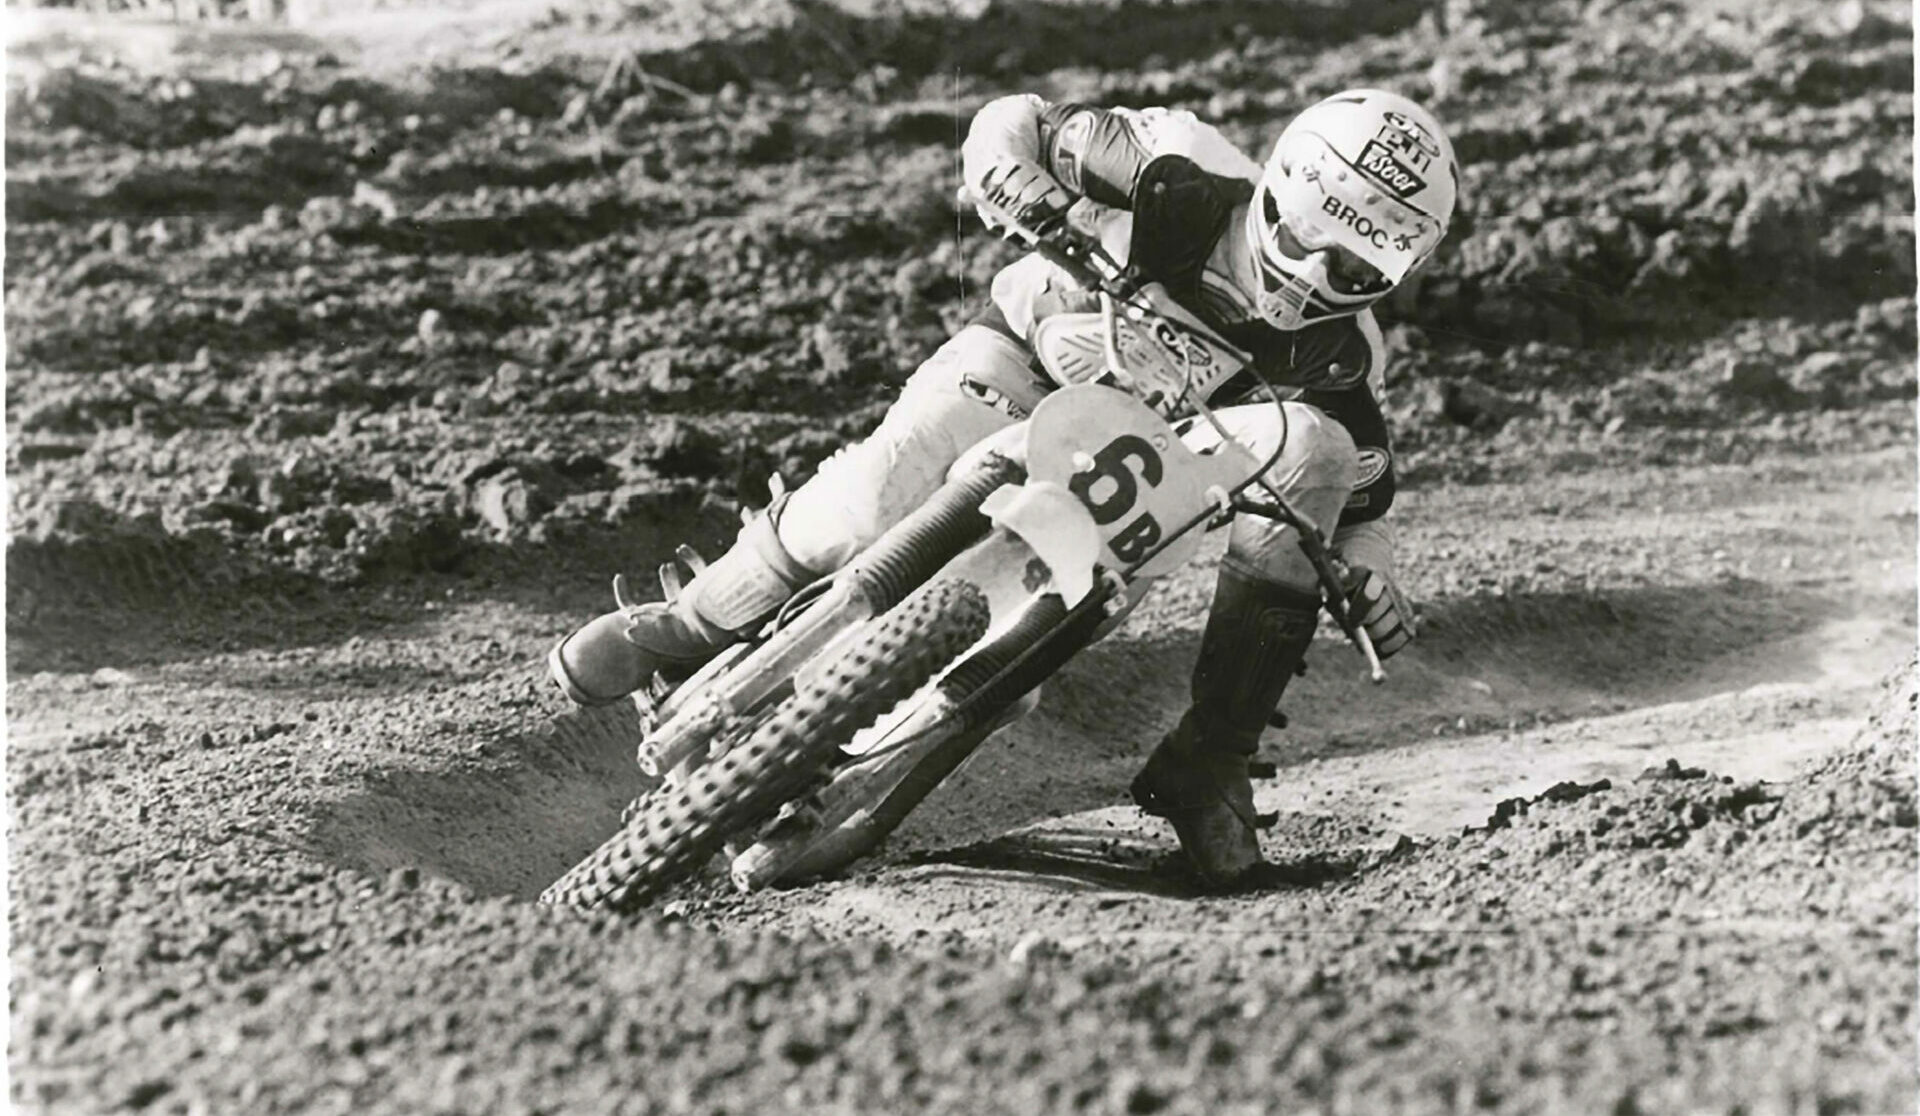 Six-time AMA Motocross National Champion and AMA Motorcycle Hall of Famer Broc Glover (6 B) will be the Grand Marshal at AMA Vintage Motorcycle Days. Photo courtesy AMA.